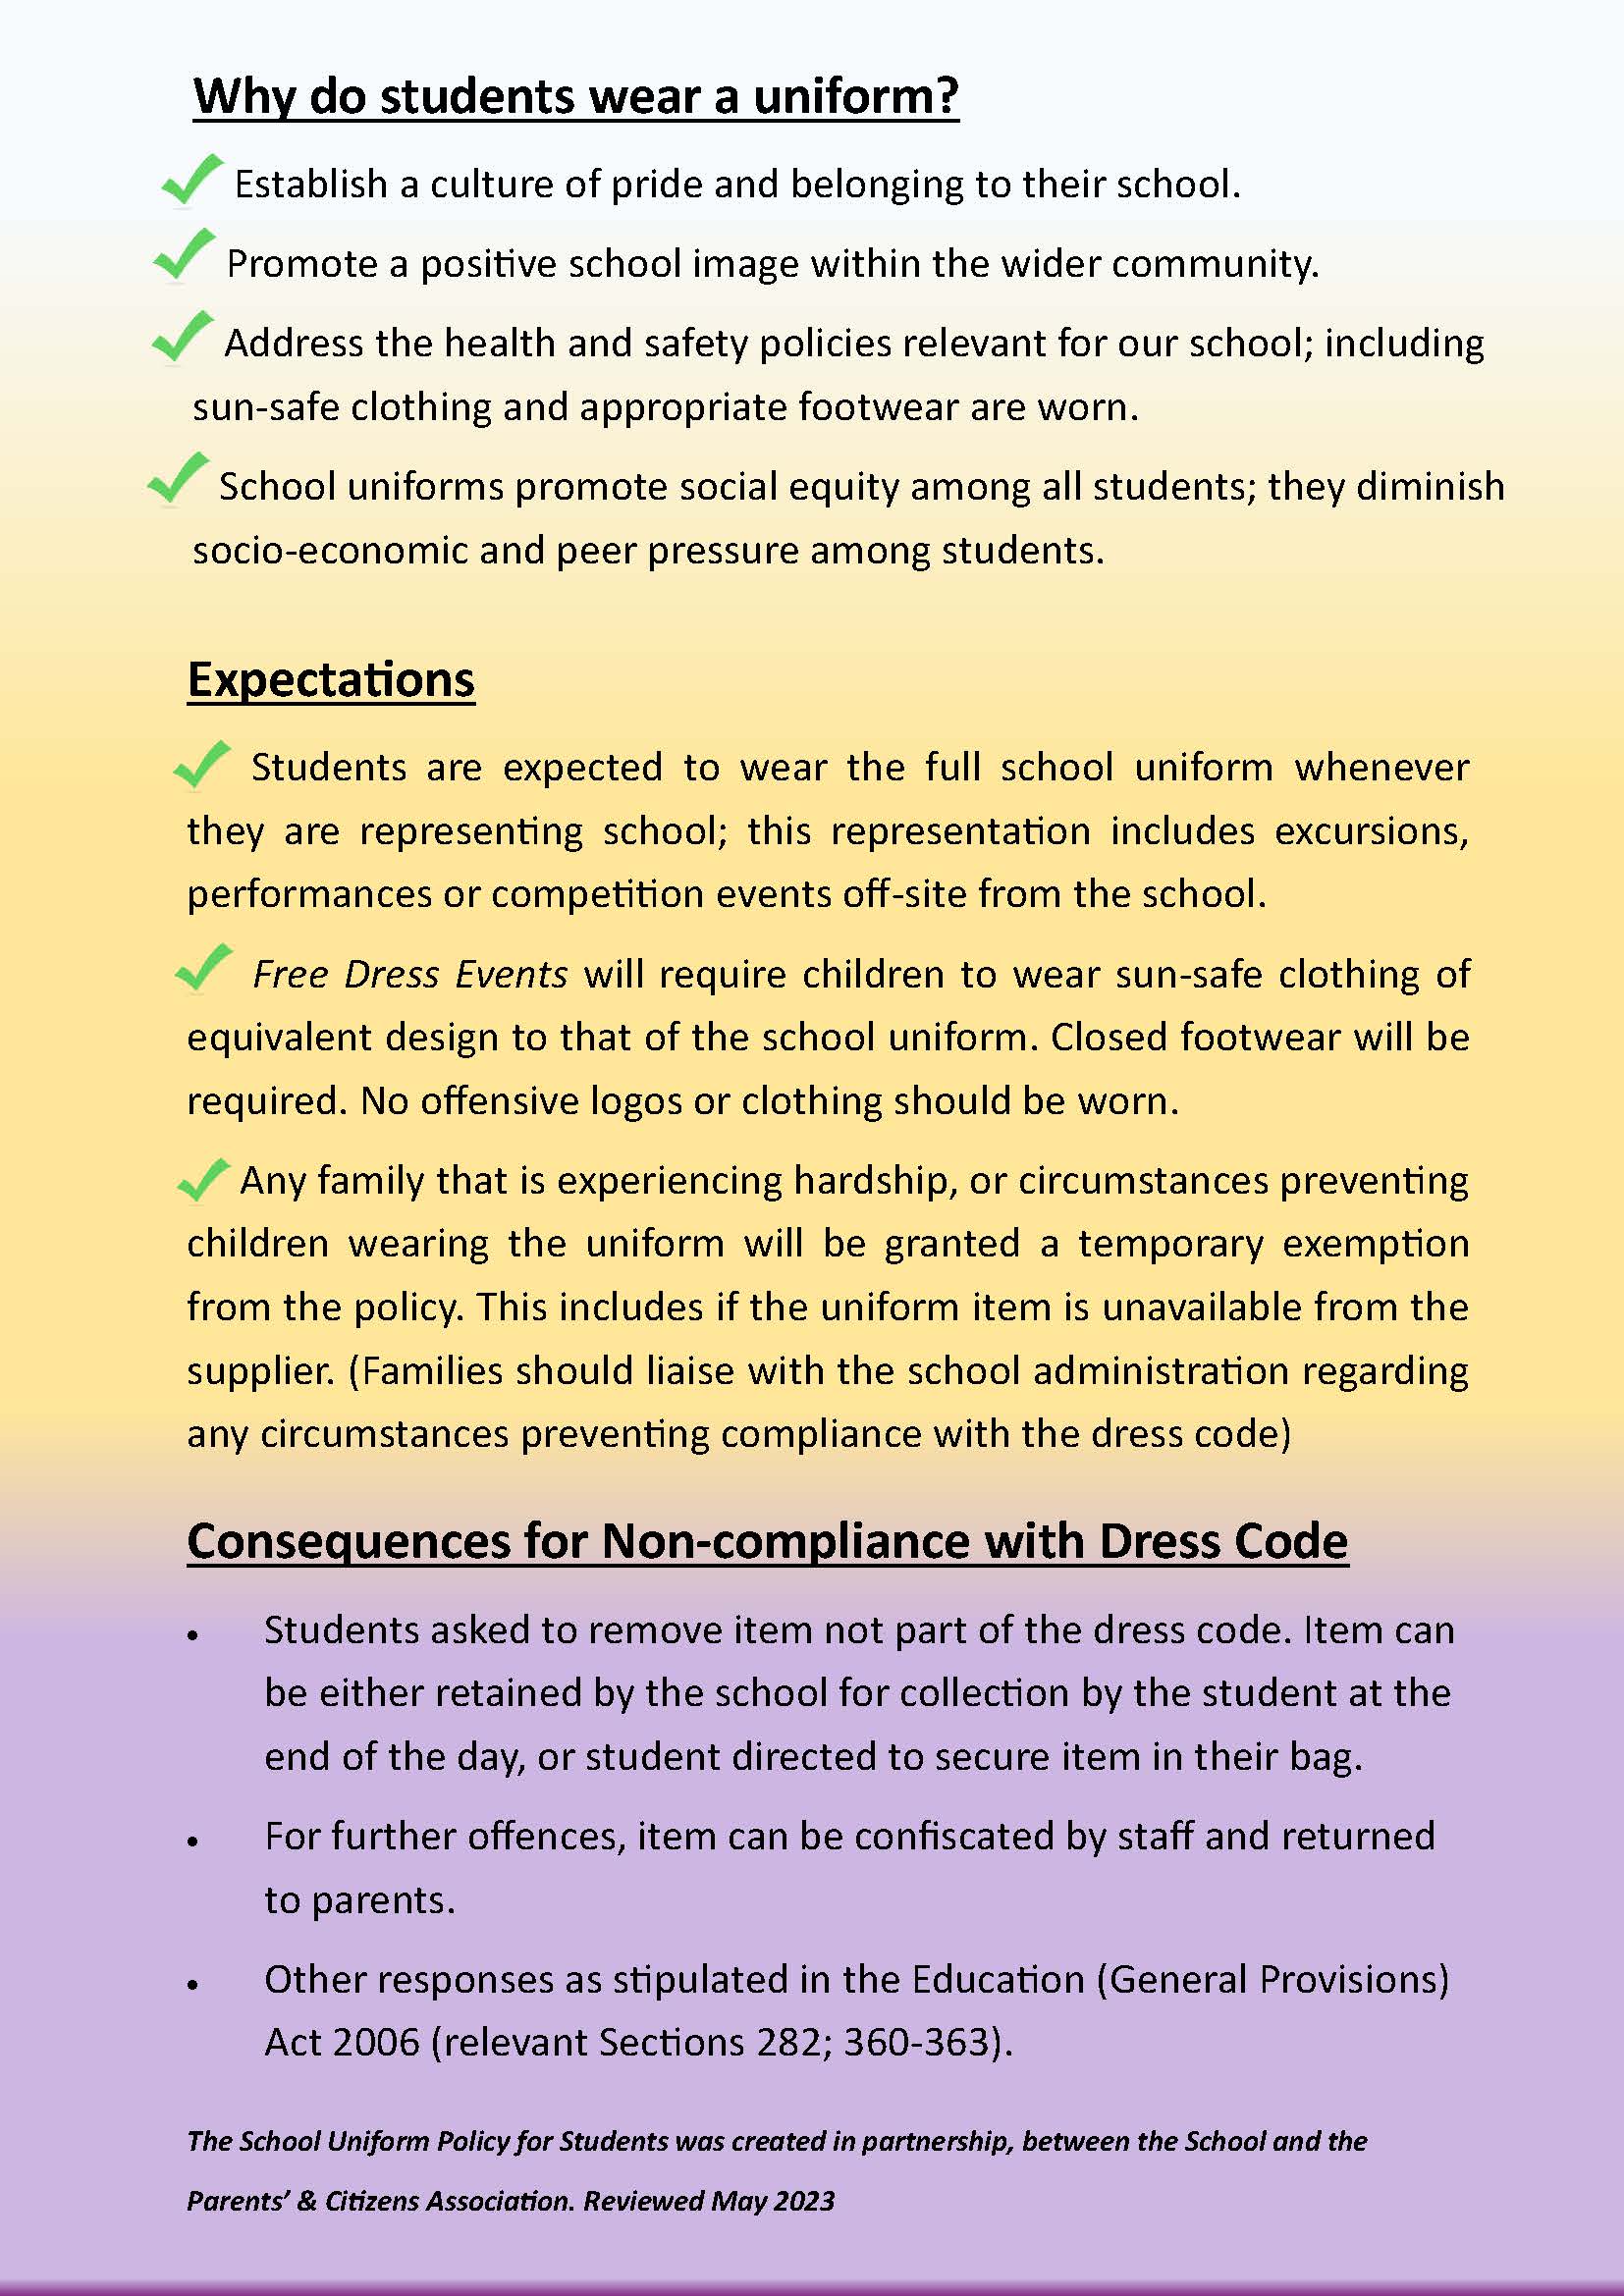 UNIFORM POLICY_May 2023 REVIEW_Page_4.jpg